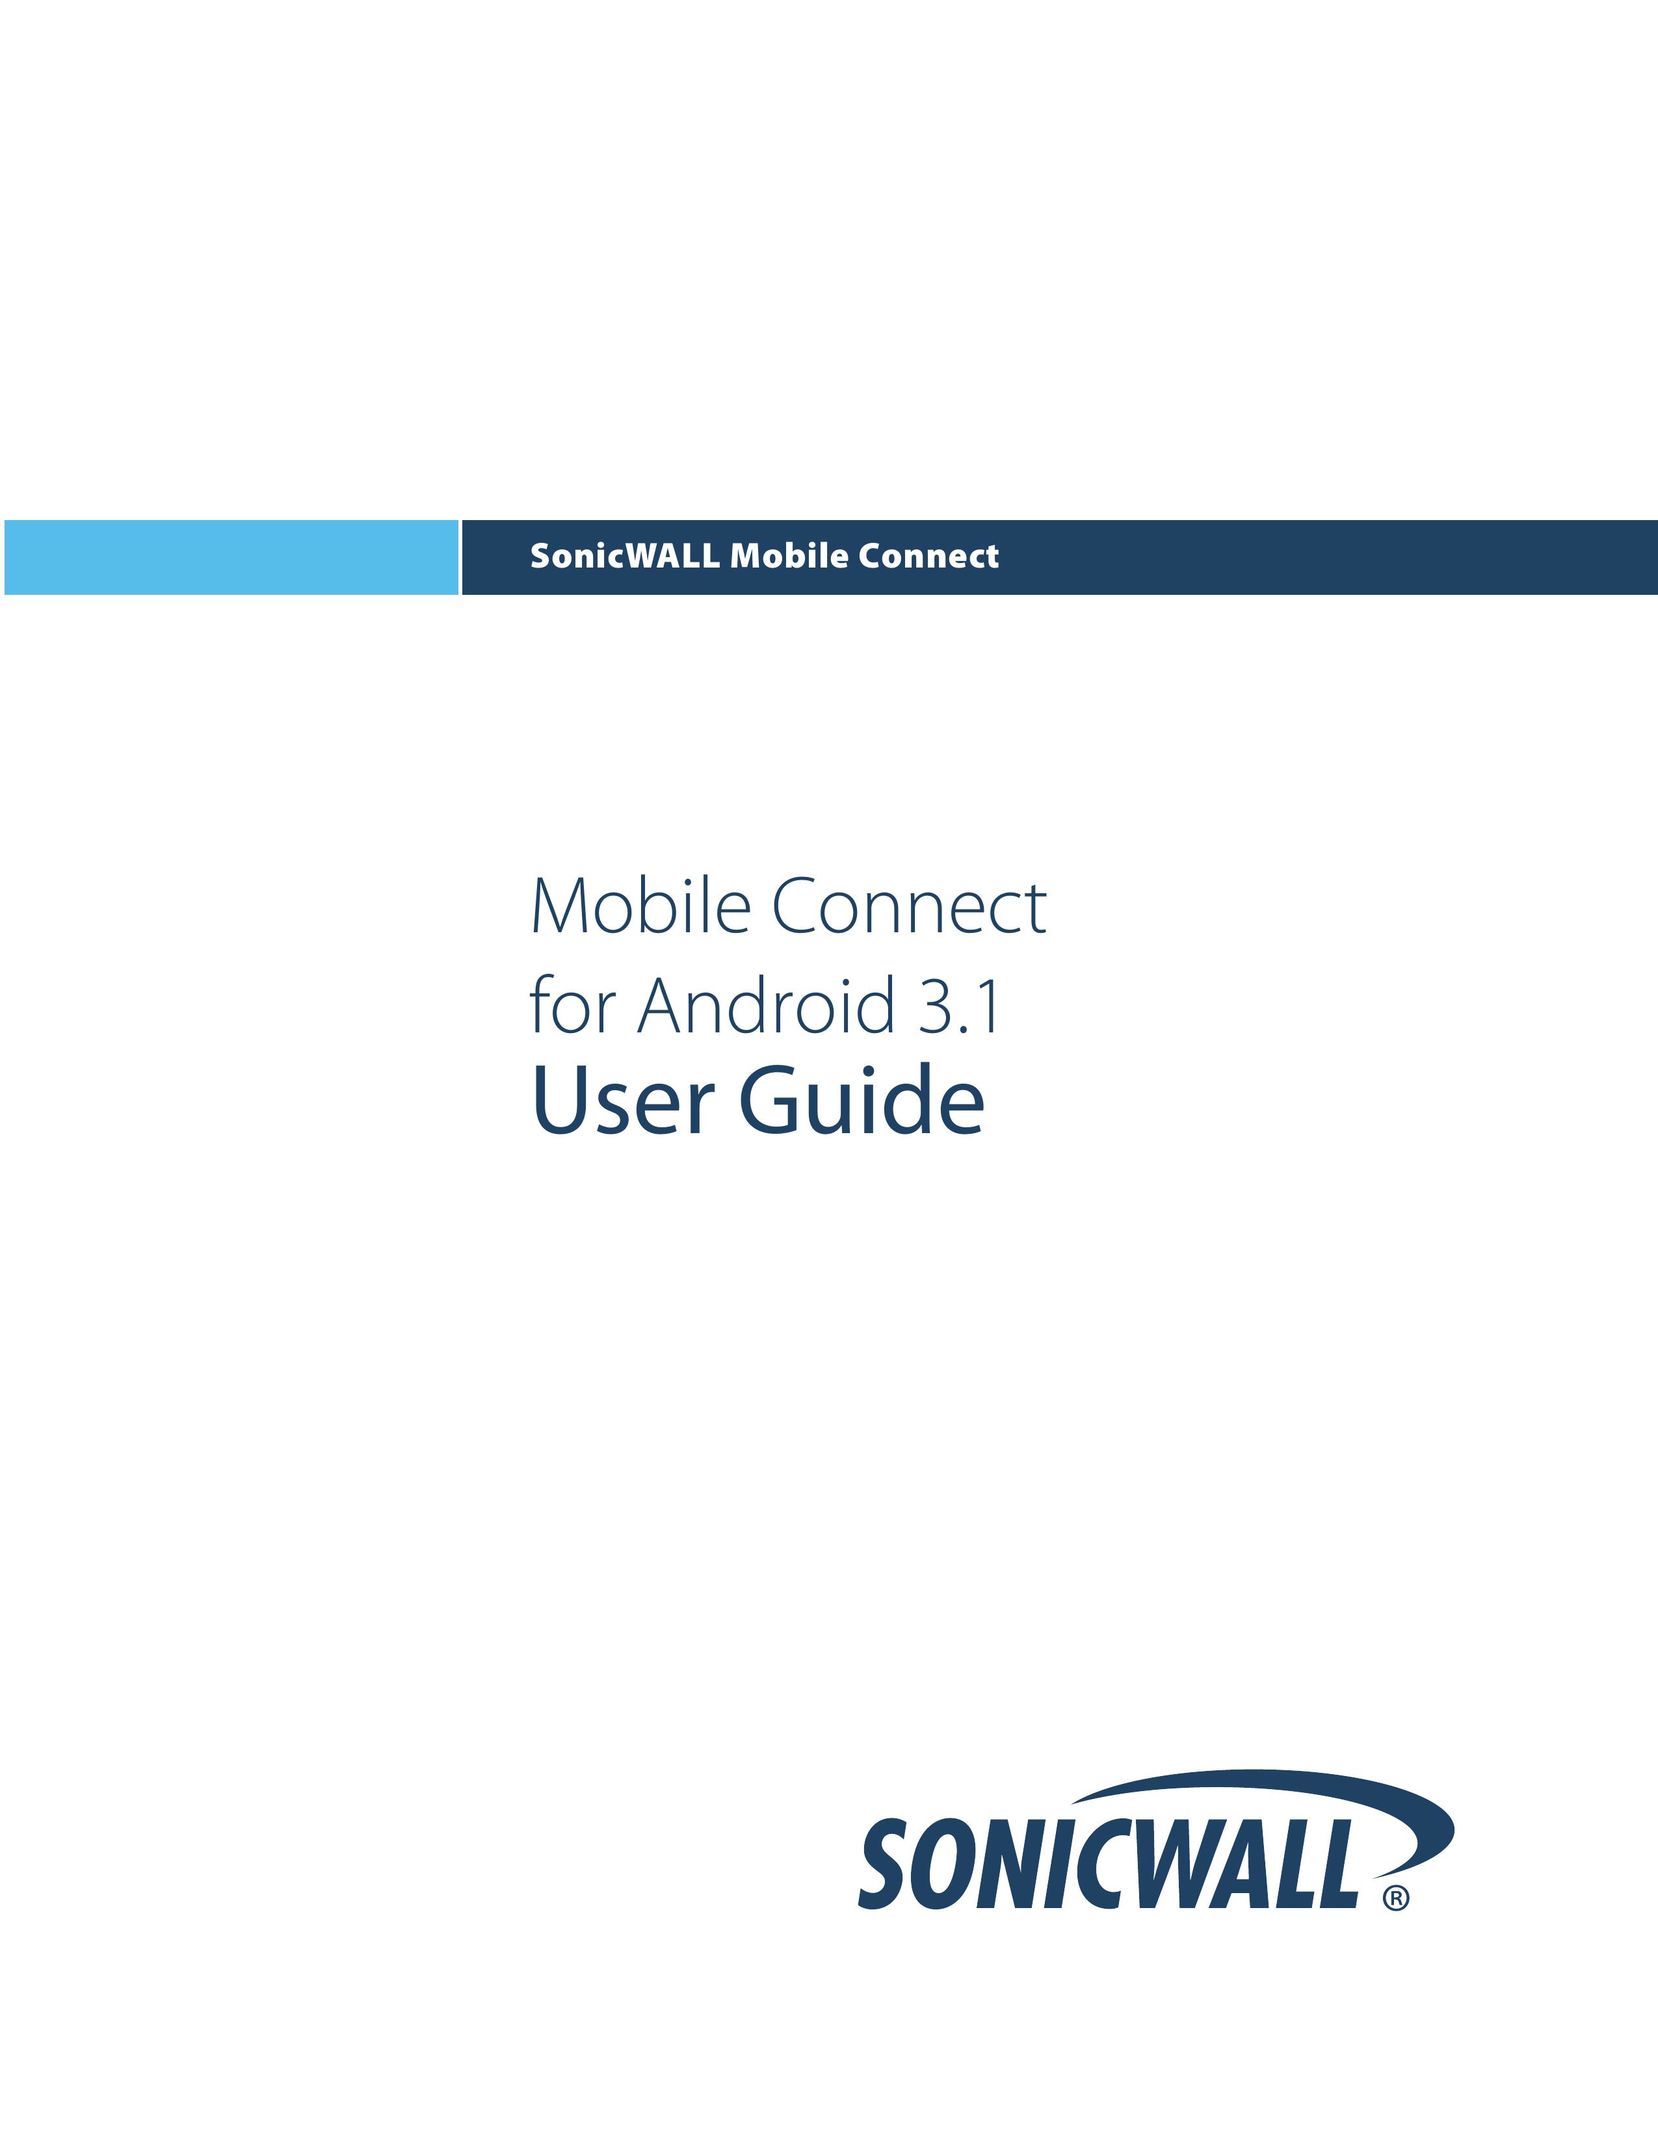 SonicWALL P/N 232-002603-00 Cell Phone User Manual